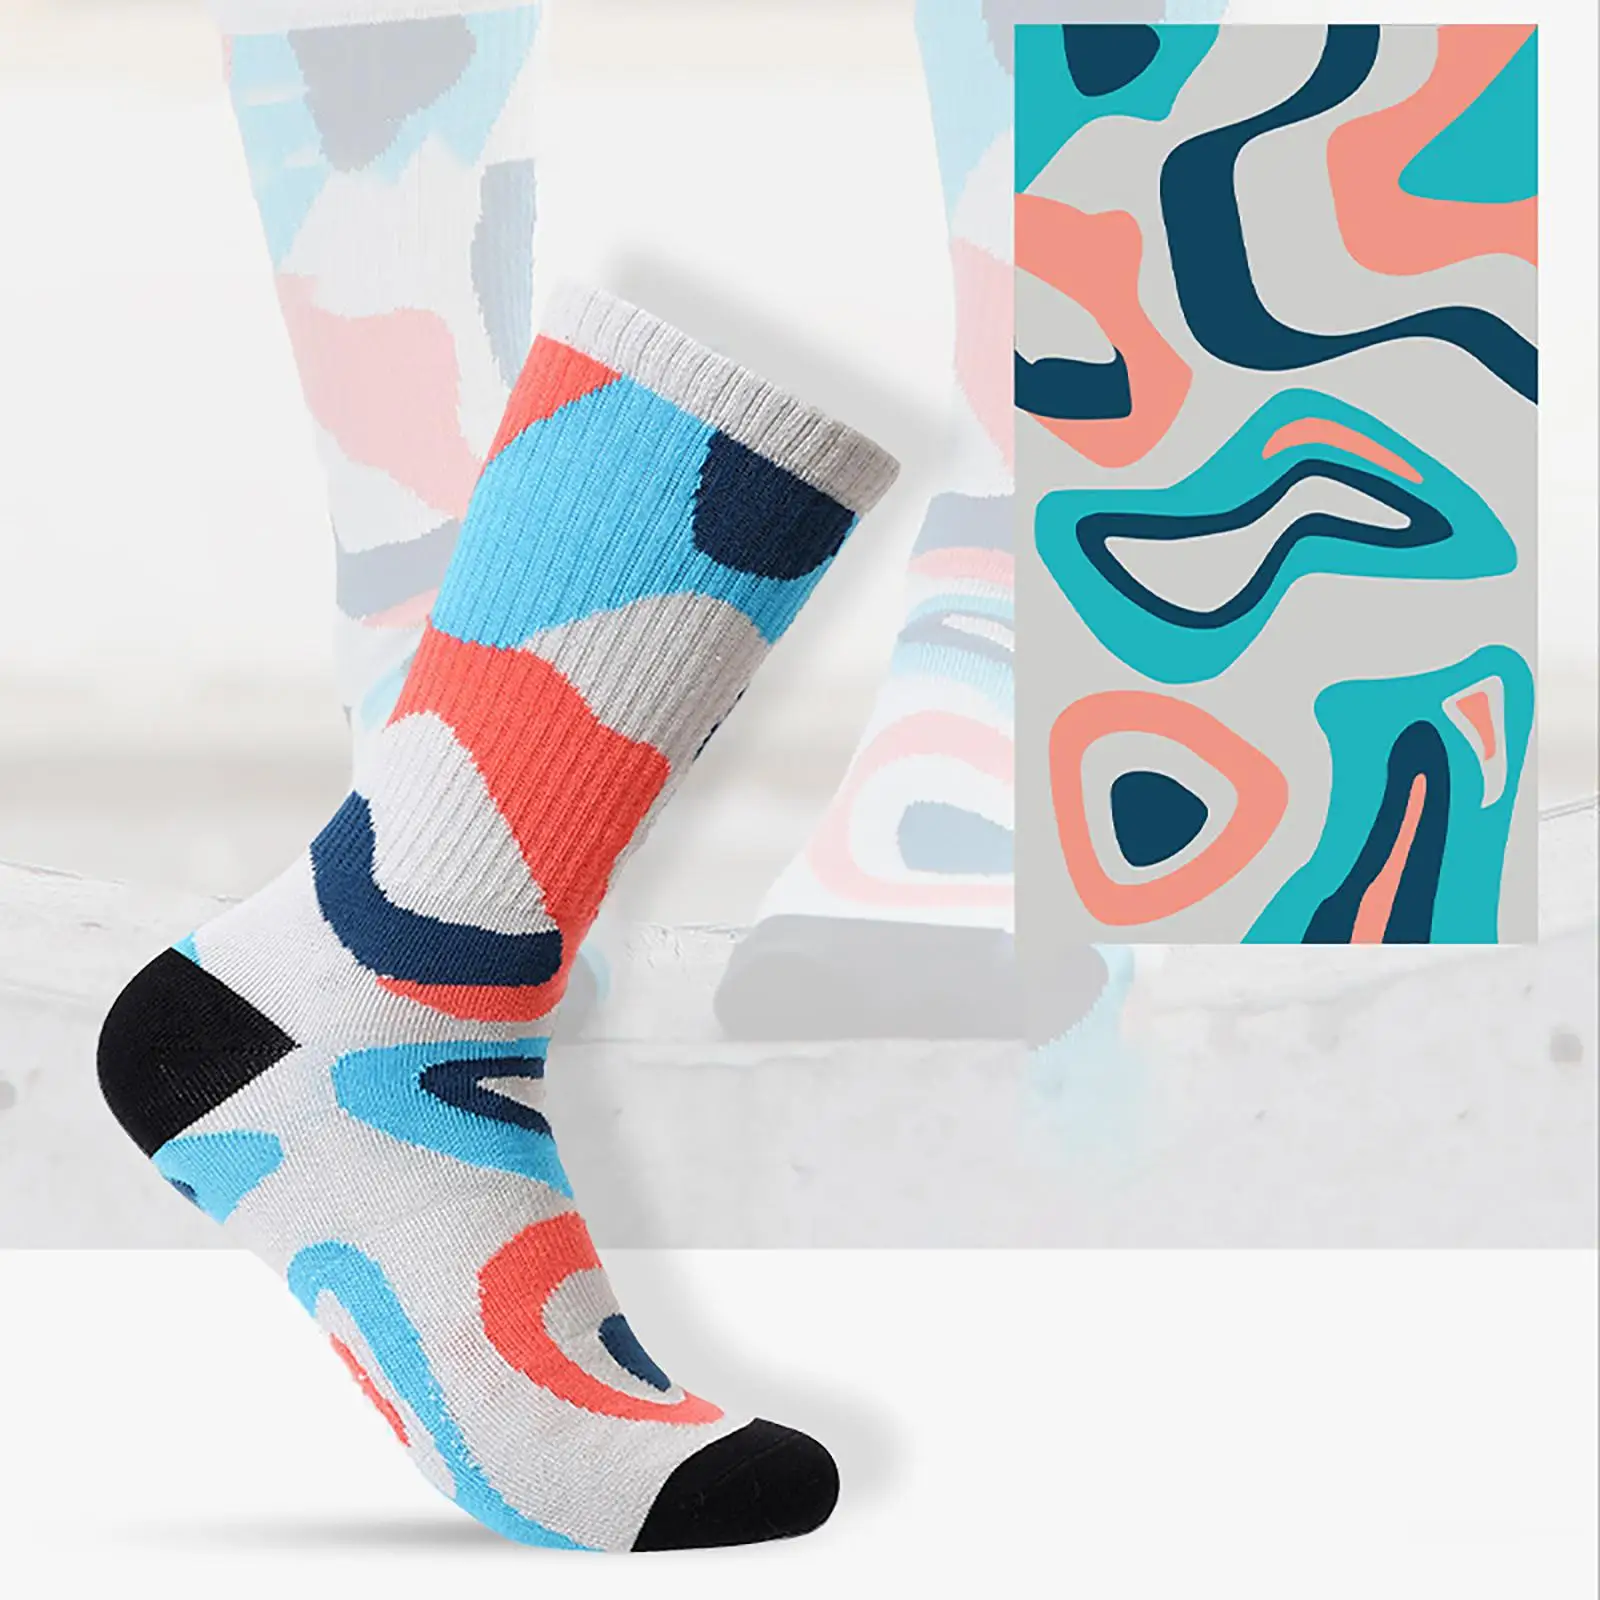 Men Women Colorful Patterned Crew Socks Combed Cotton Fashionable Cool Novelty Casual Crazy Sports Socks for Running Basketball